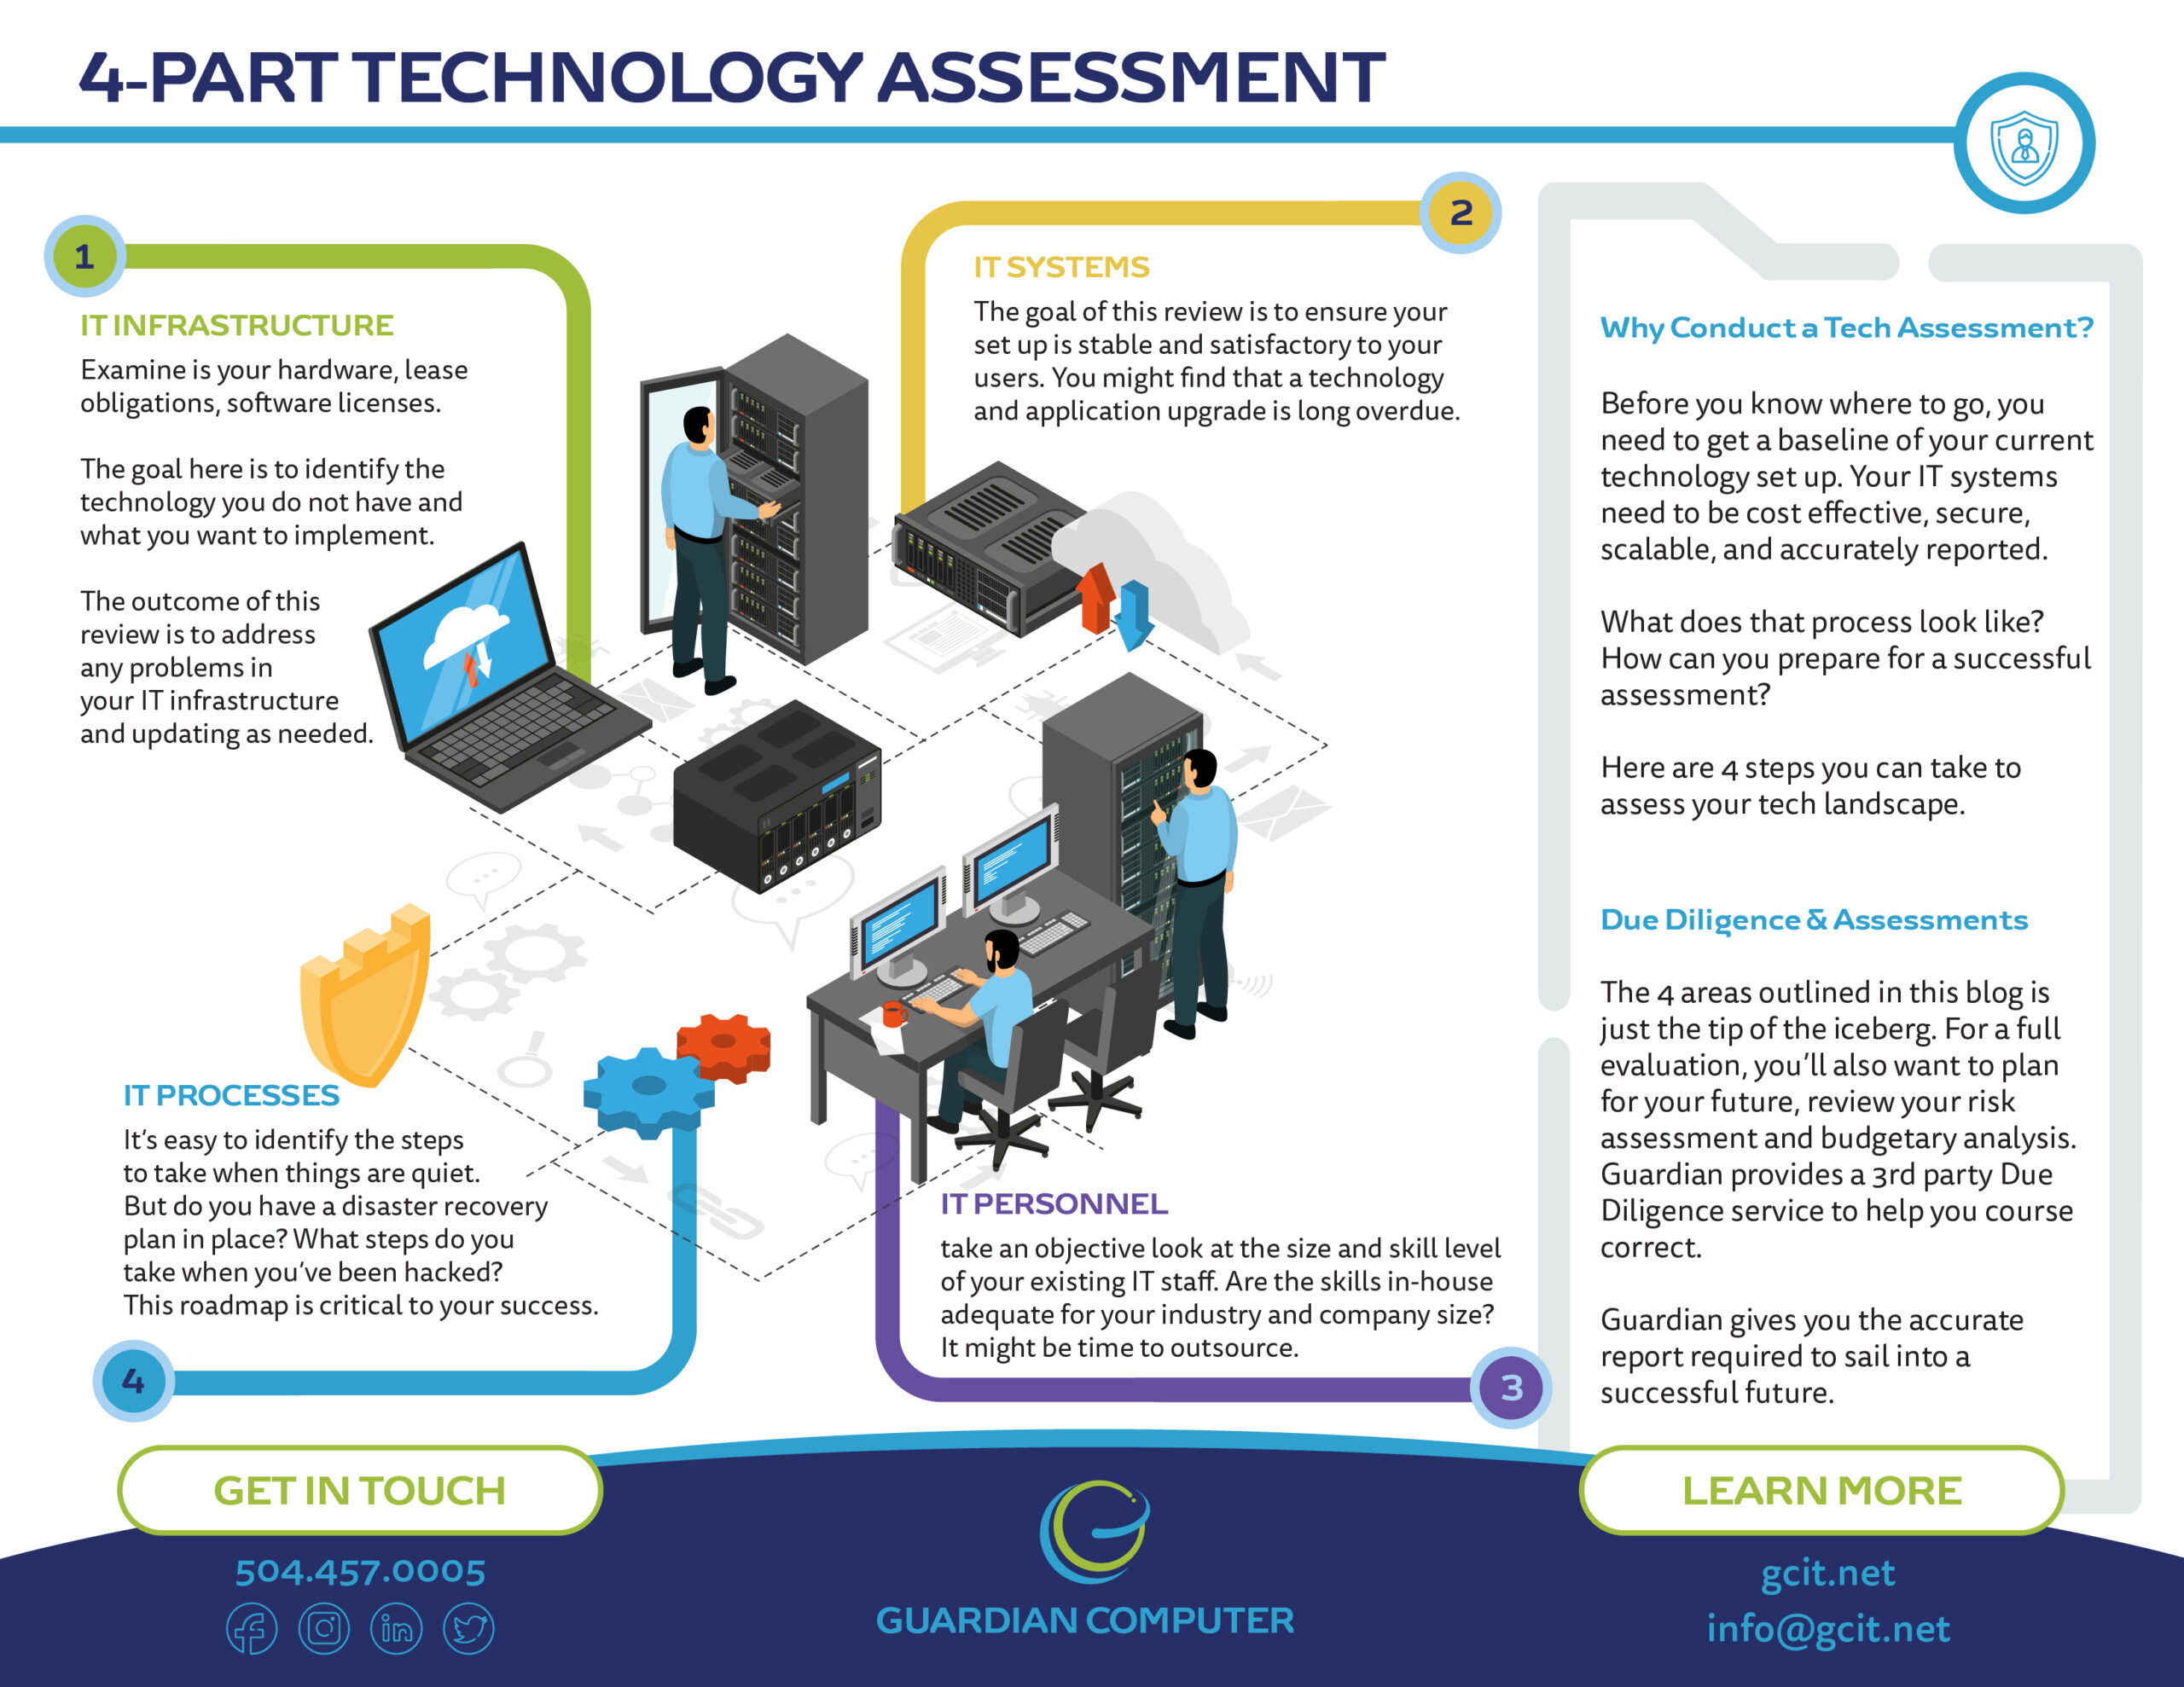 Infographic detailing a 4 part technology assessment.